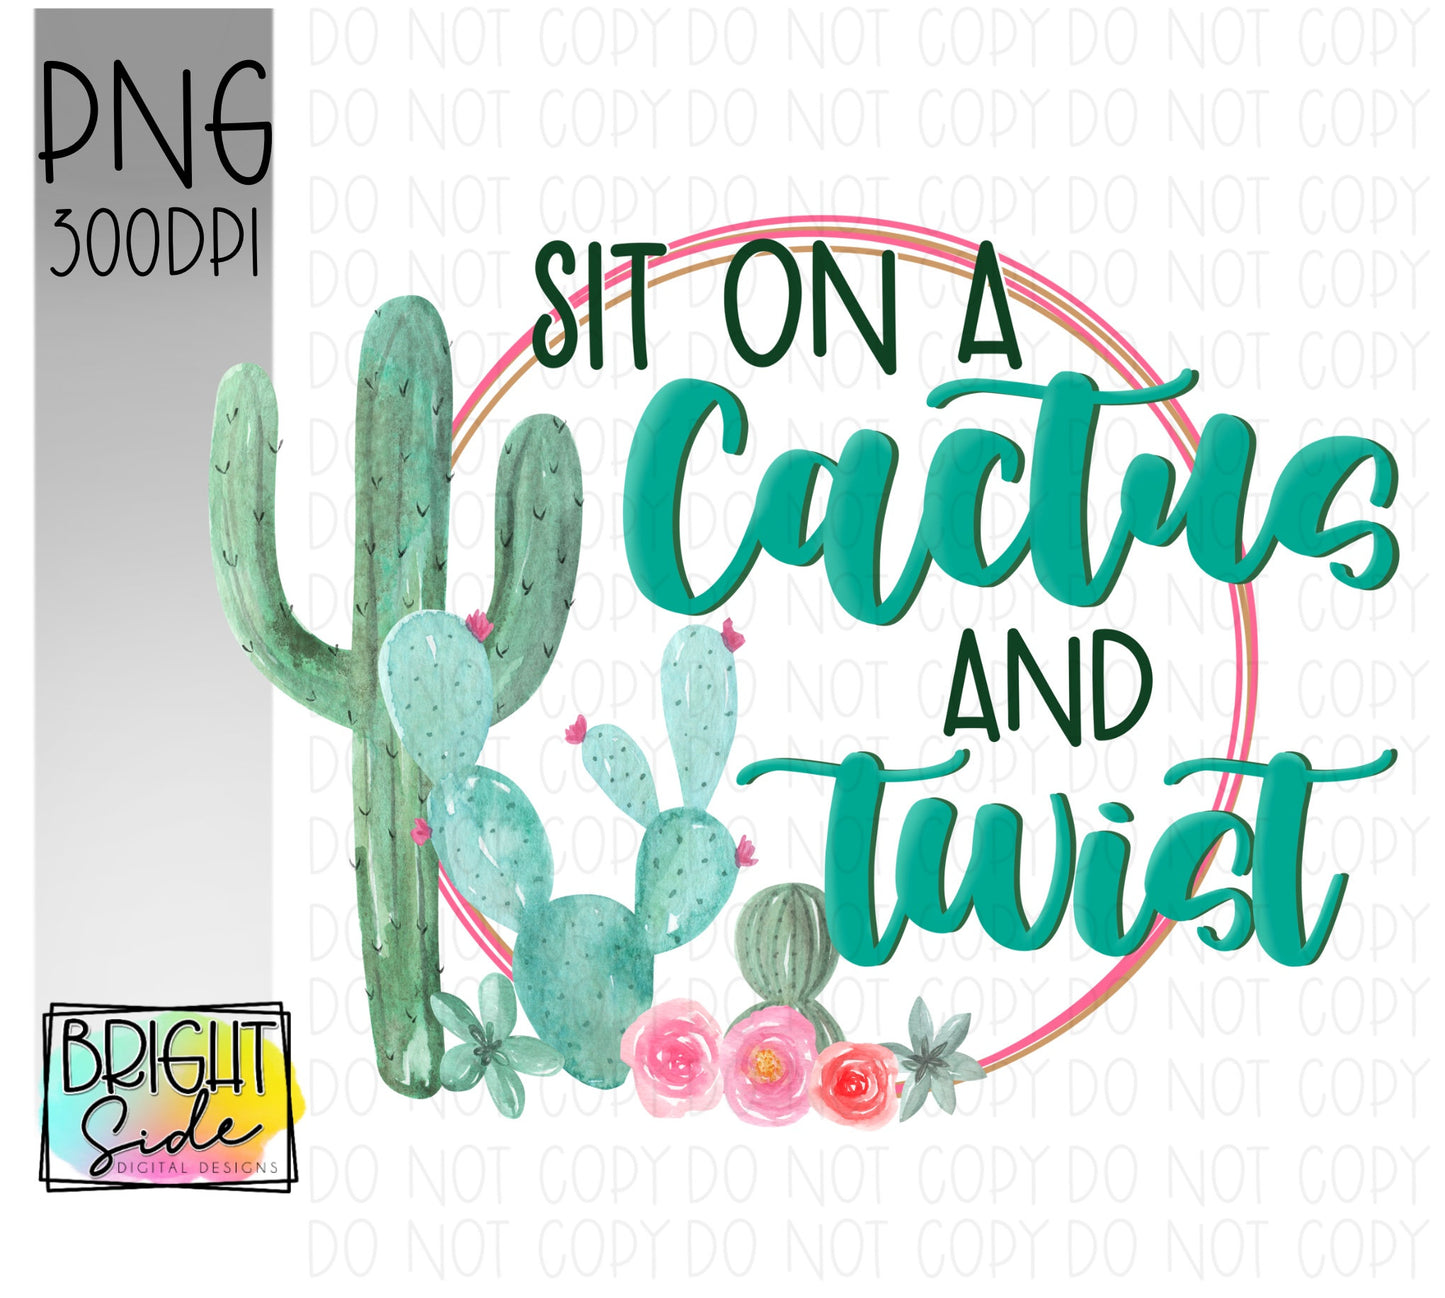 Sit on a cactus and twist -1